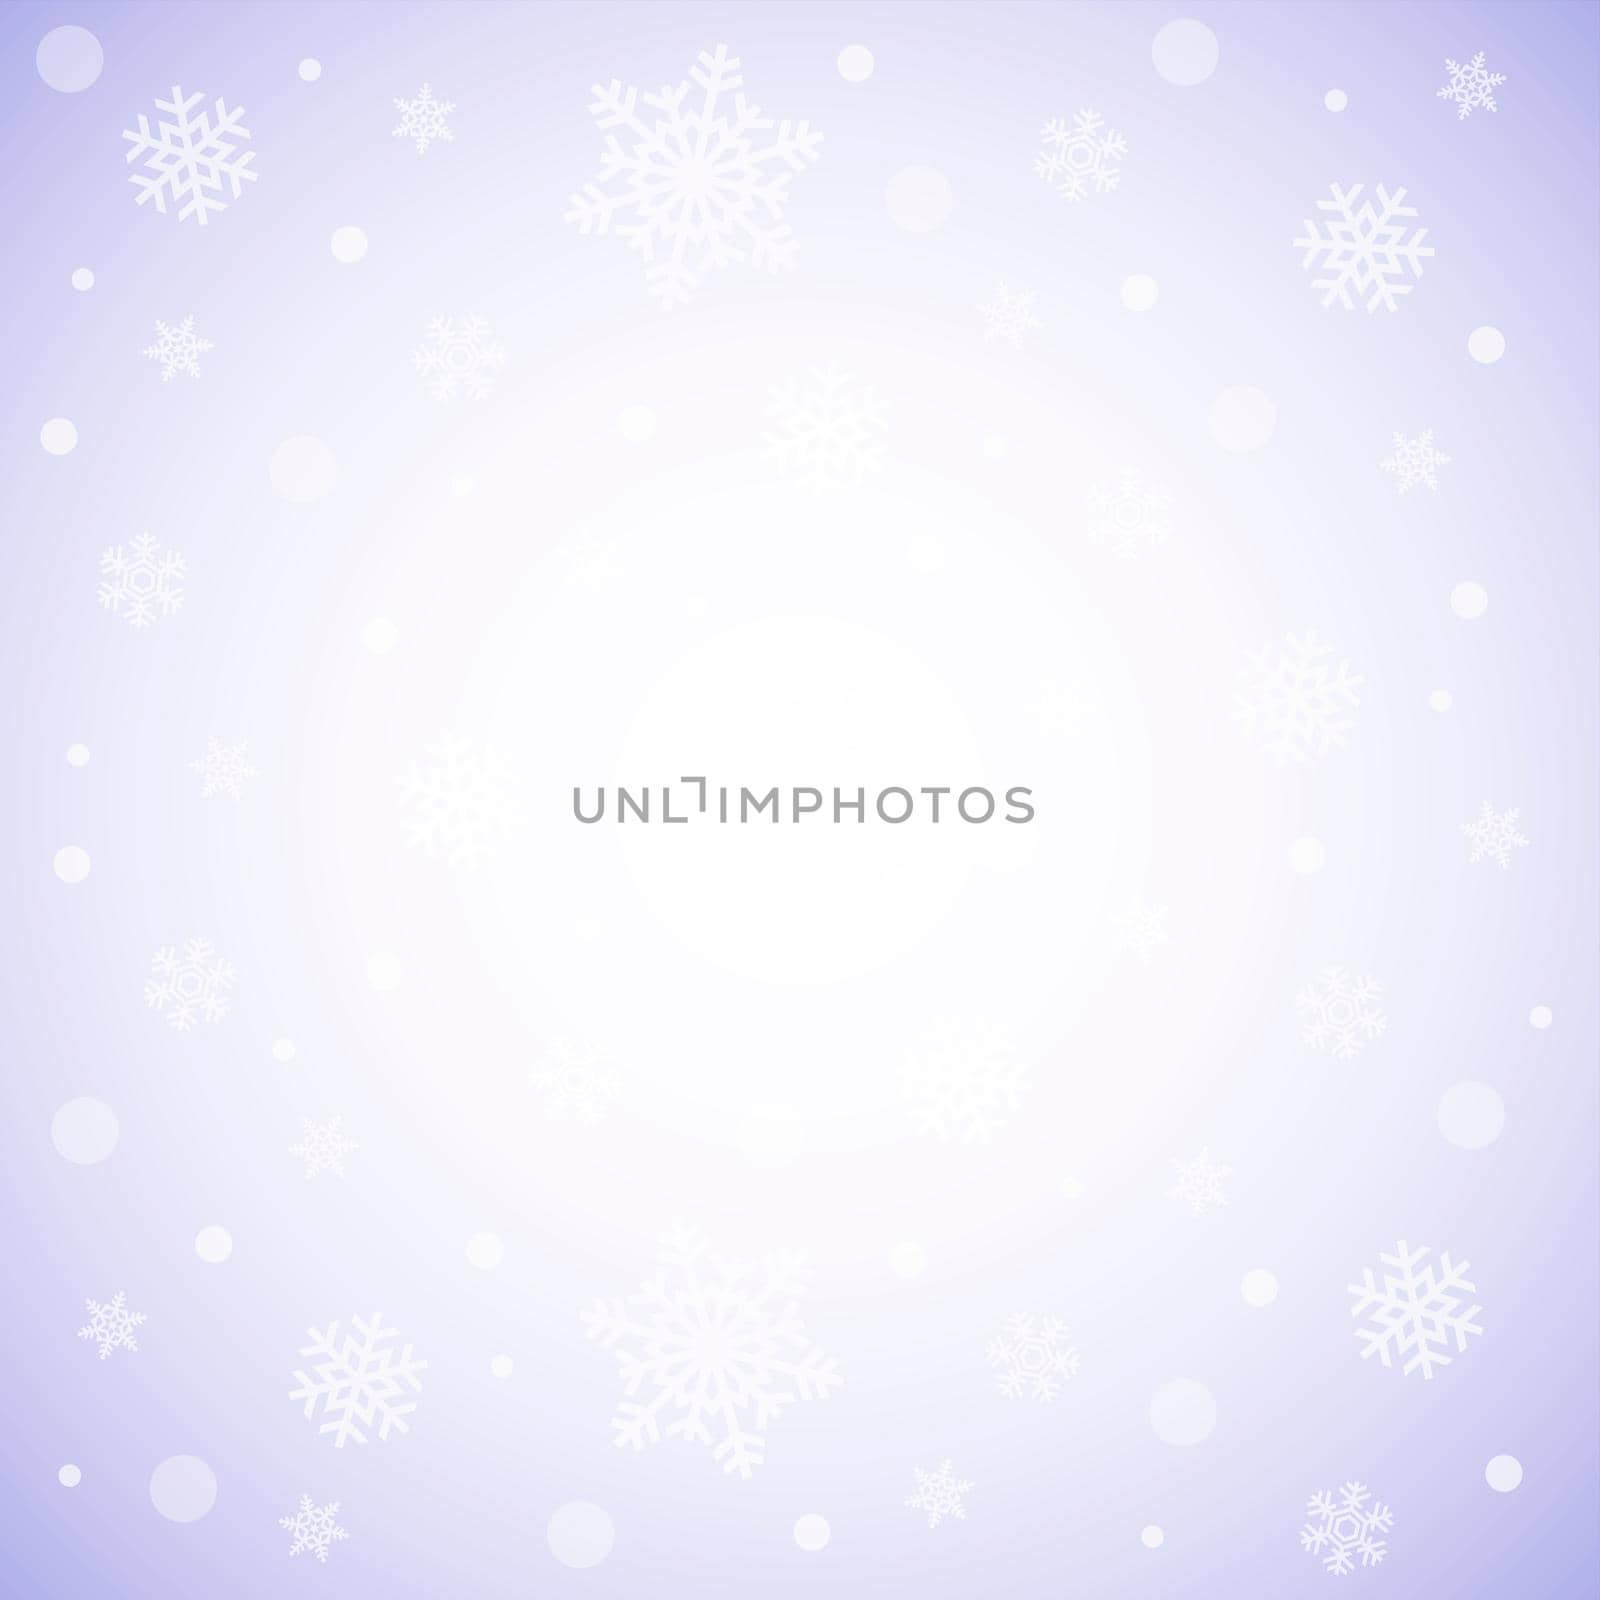 Delicate sky background with falling snowflakes